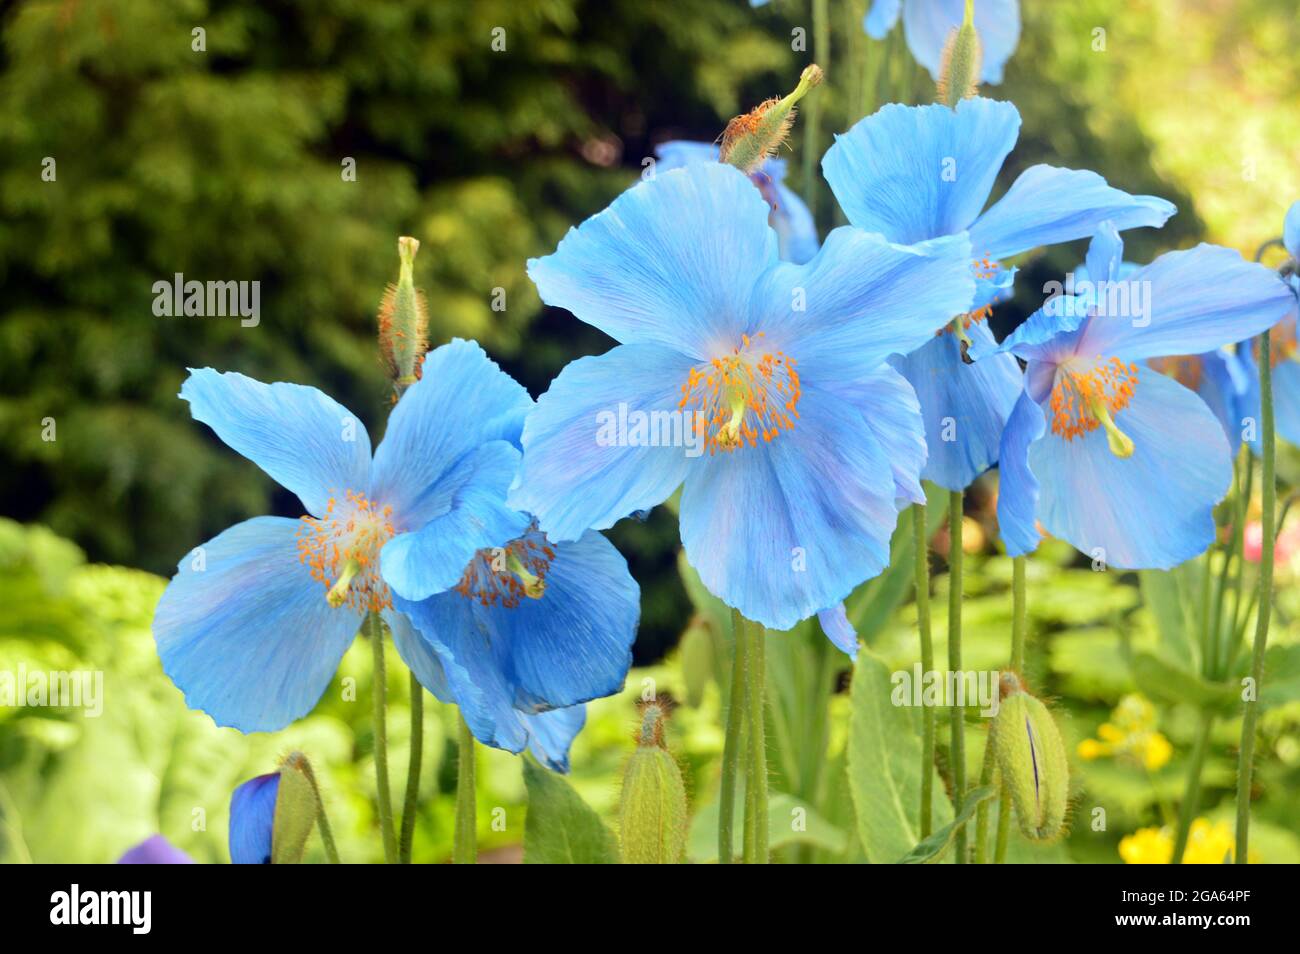 Light Blue Himalayan Poppy 'Meconopsis betonicifolia' Flowers grown in the in the Borders at RHS Garden Harlow Carr, Harrogate, England, UK. Stock Photo